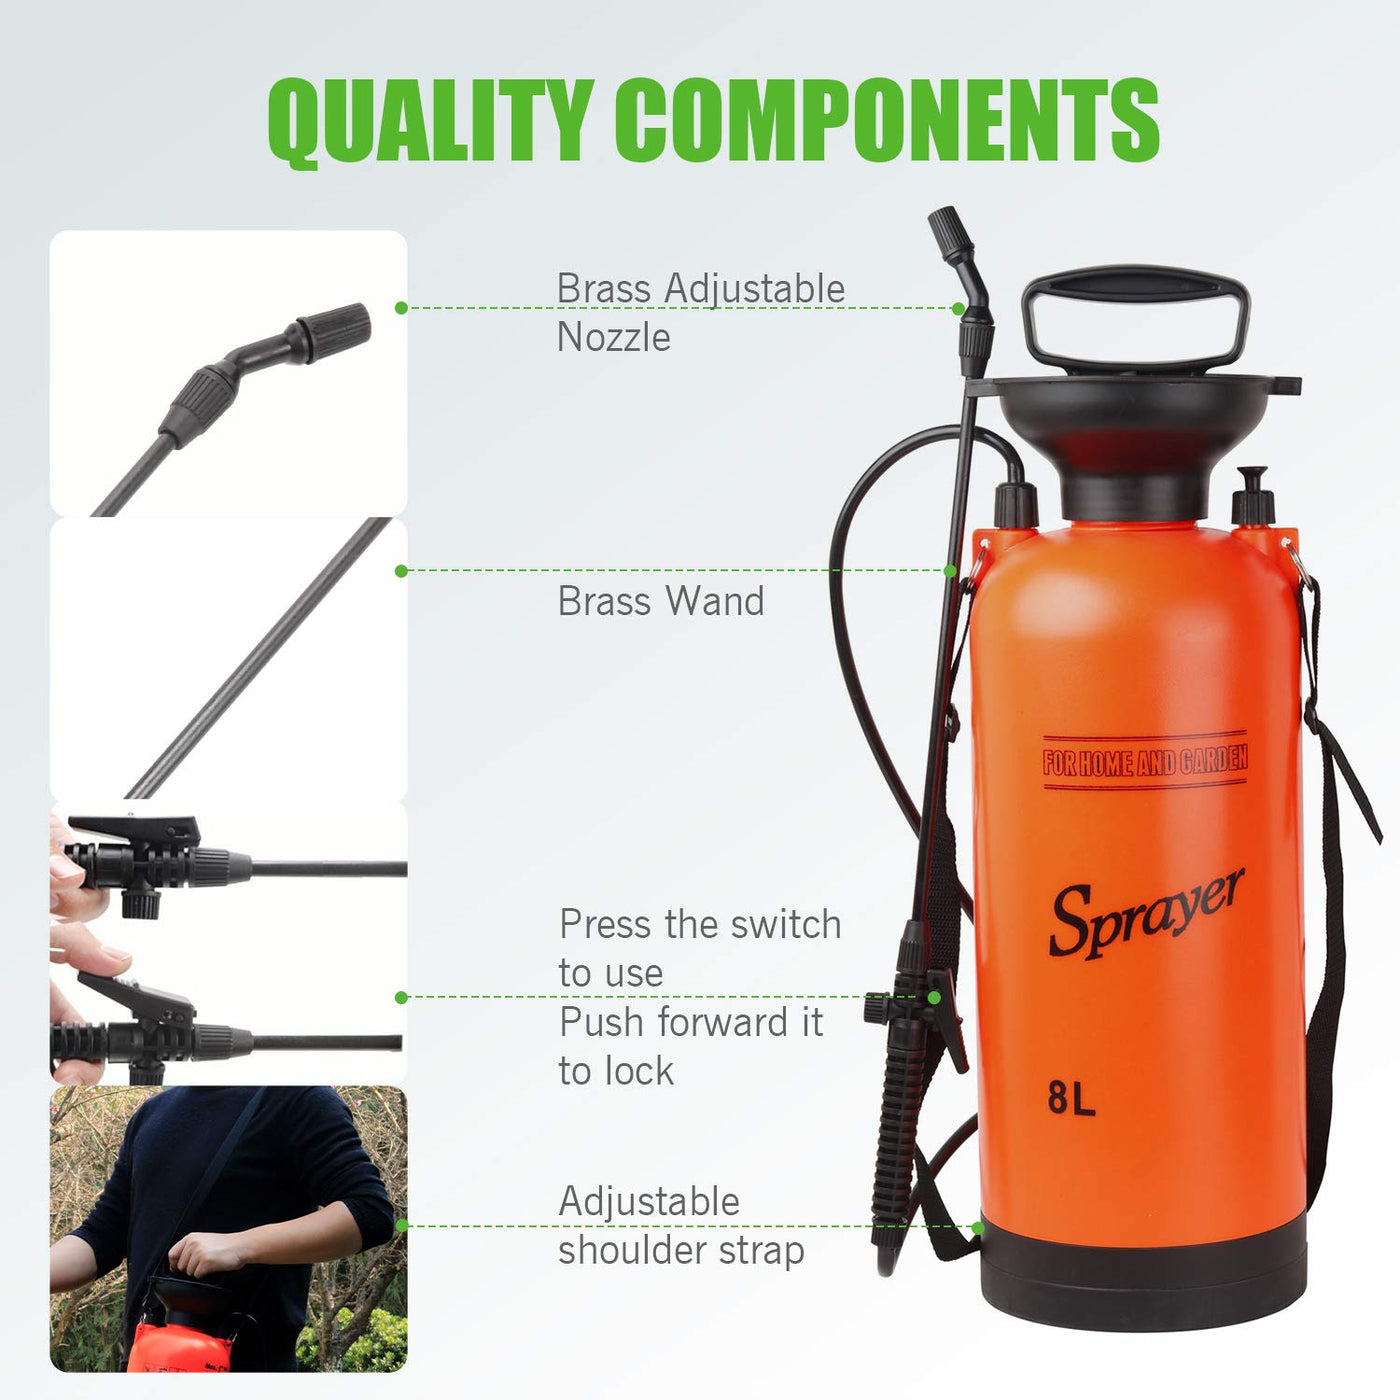 CLICIC 2.9 Gallon (11L) Lawn and Garden Portable Sprayer Pump Pressure  Sprayer with Pressure Relief Valve and Adjustable Shoulder Strap for Lawns  and